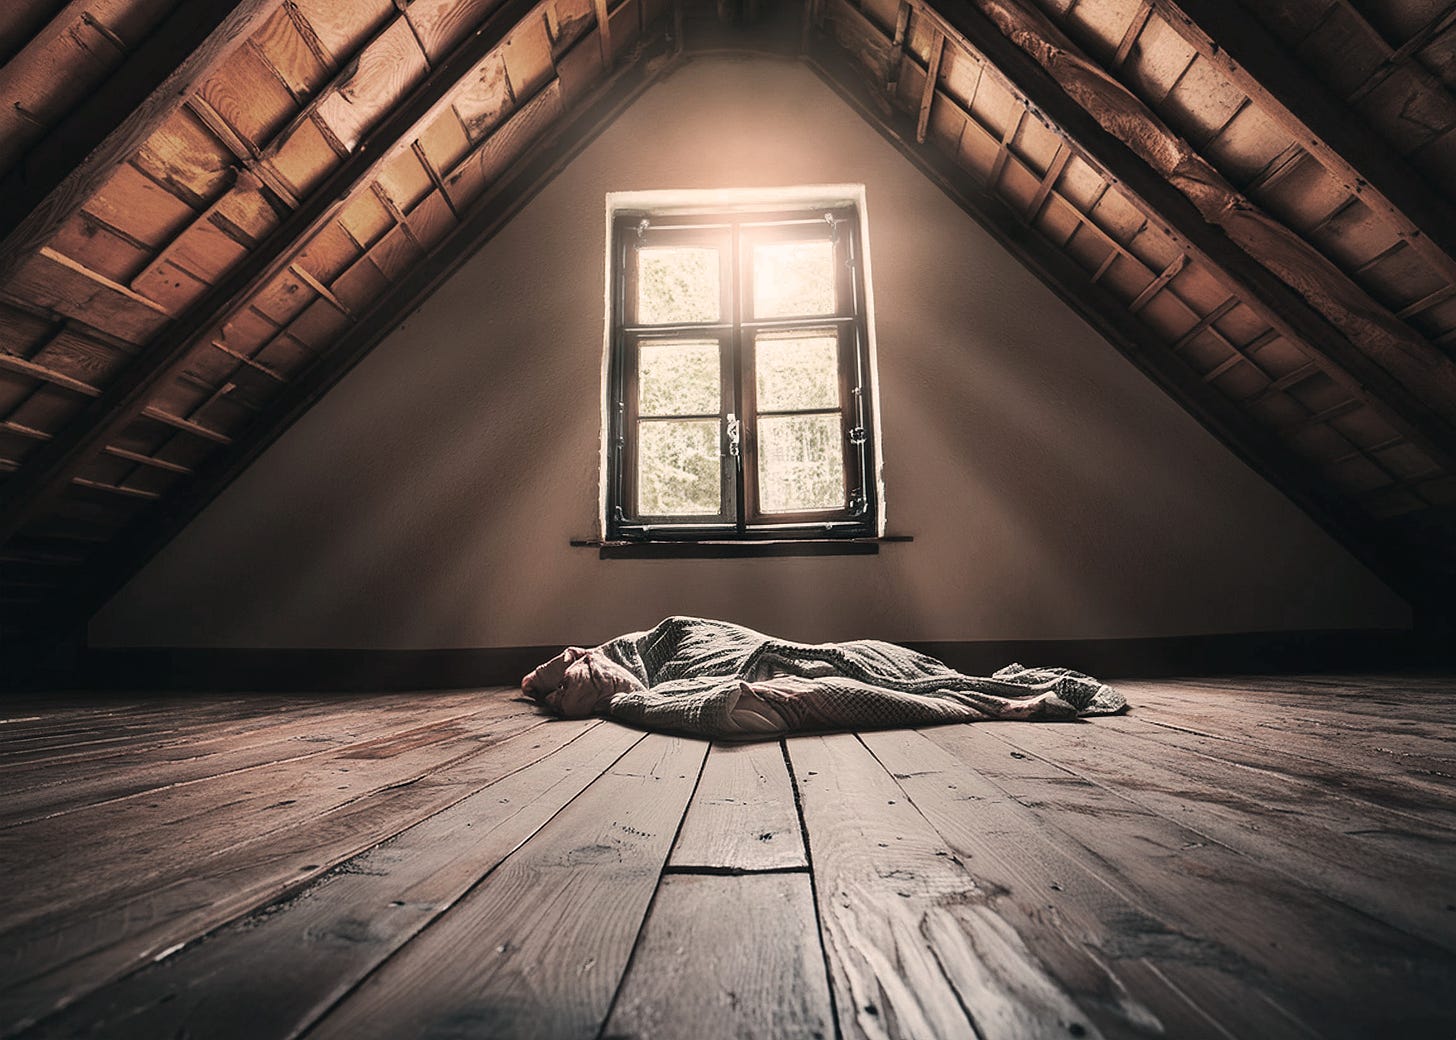 abandoned attic bedroom with old worn blanket on wood floor and meager sunlight streaming from small window